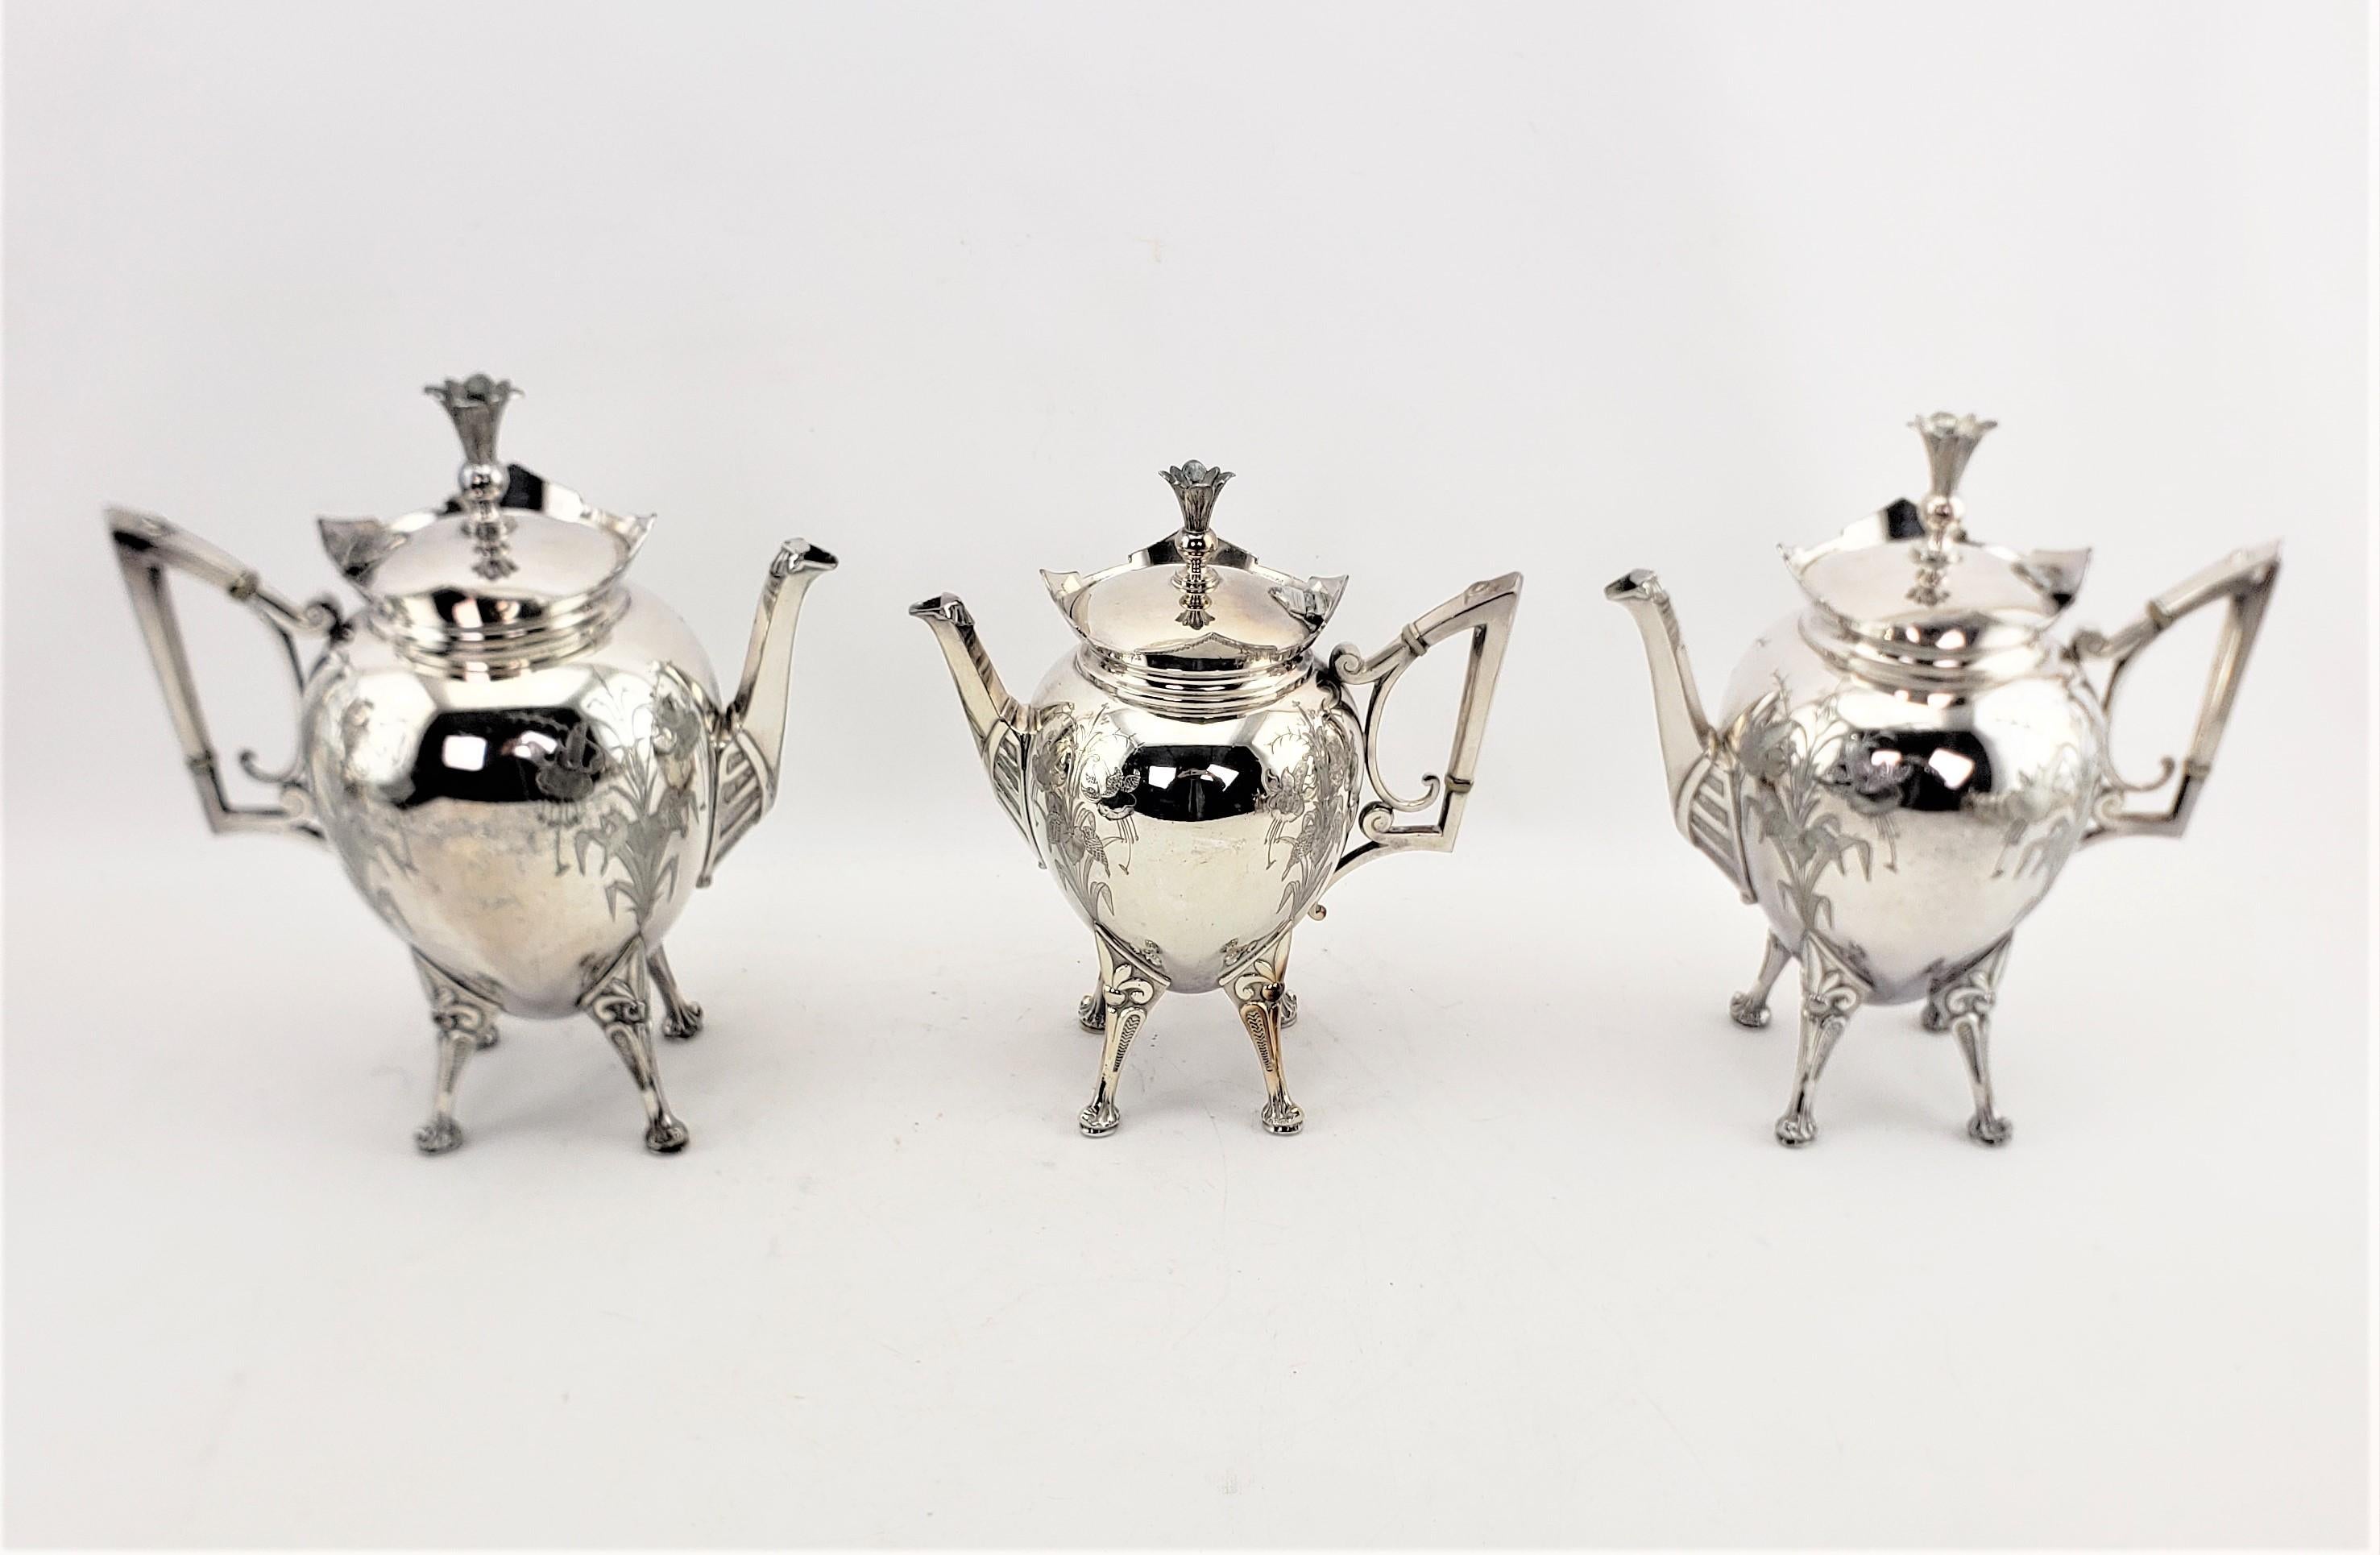 Machine-Made Antique Aesthetic Movement 7 Piece Silver Plated Tea Set with Floral Decoration For Sale